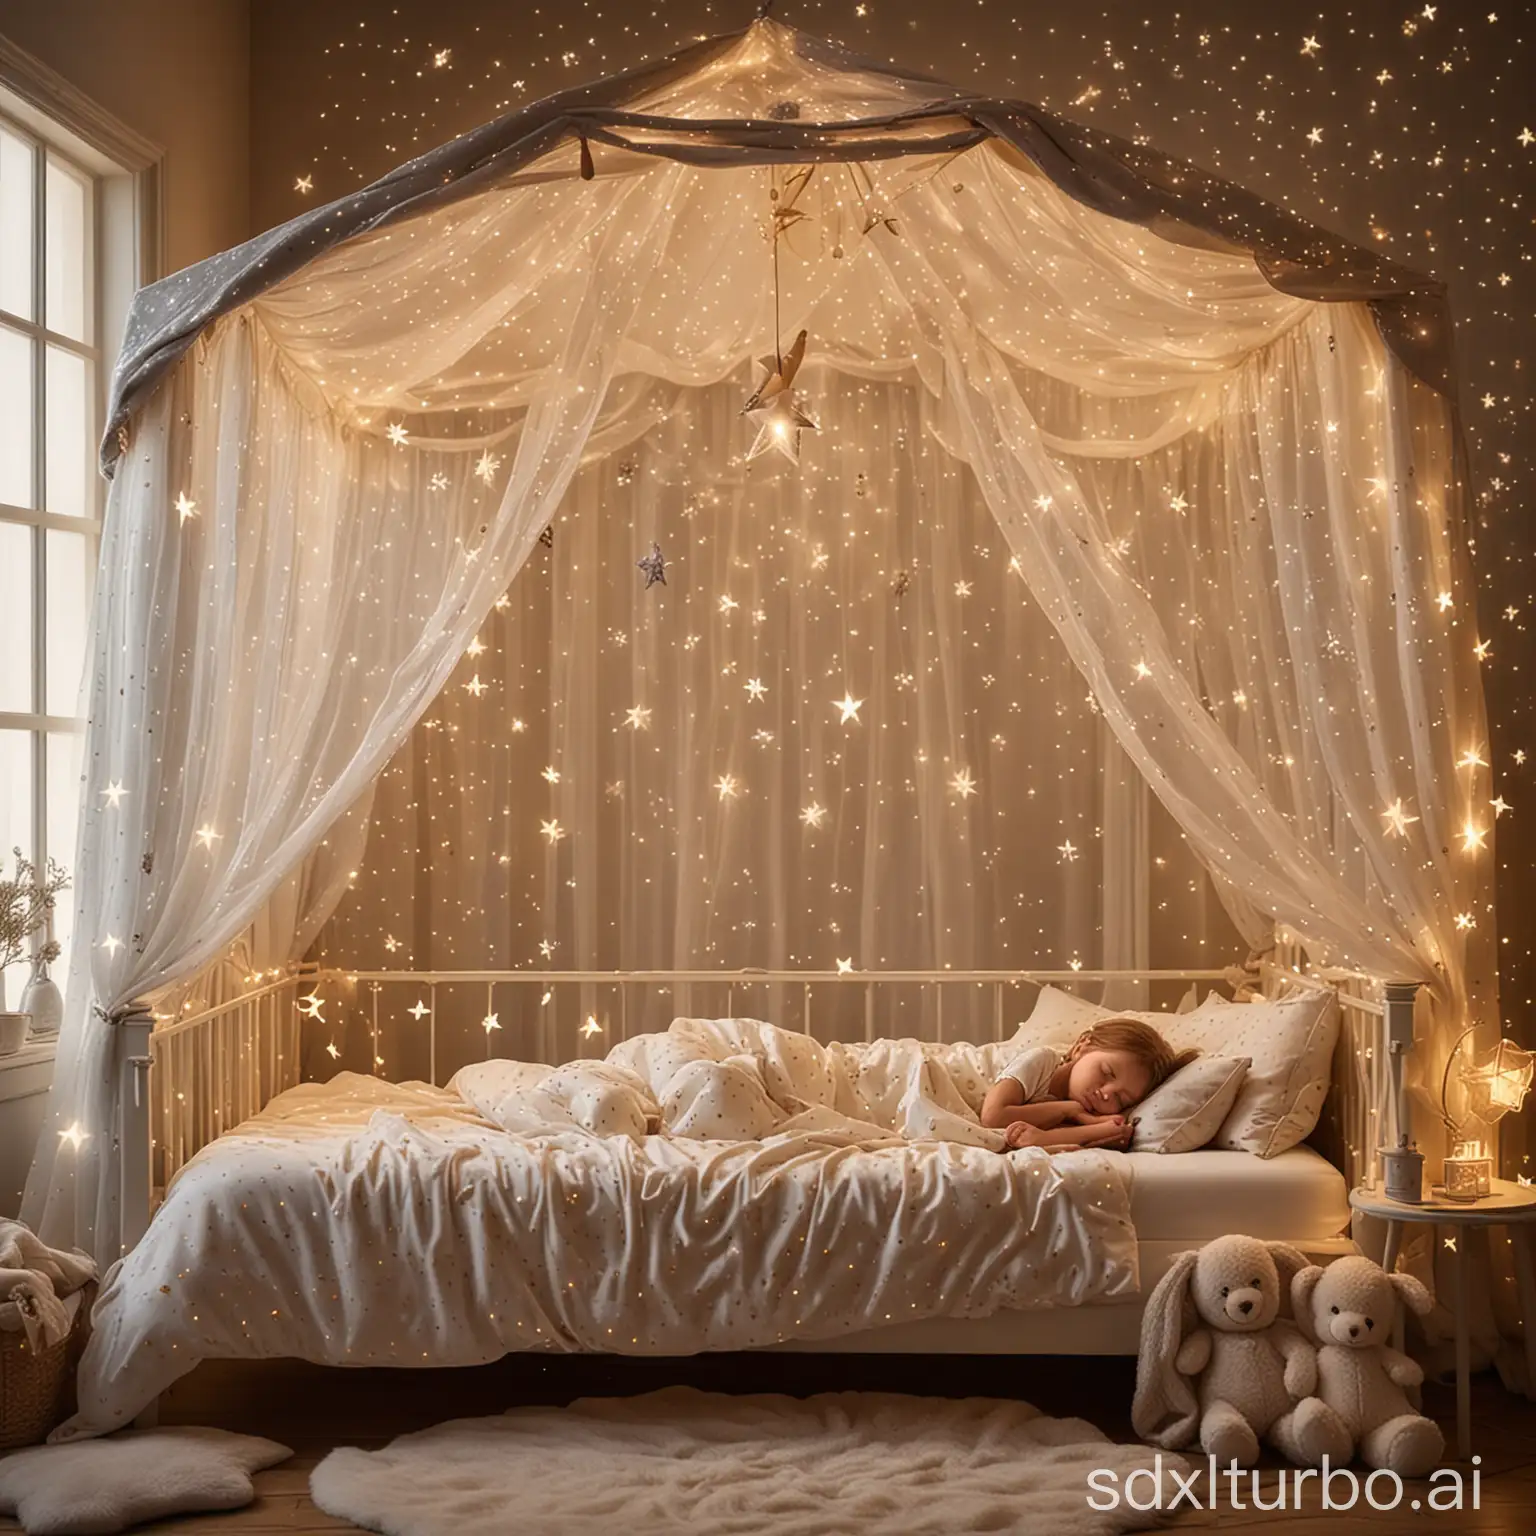 A child is sleeping on a heavenly bed with a canopy of glistening starlights. The bedding is soft and cuddly, and the little dreamer holds a plush meteor tightly in their arms. Real stars shine through the window and bathe the room in soft, magical light.